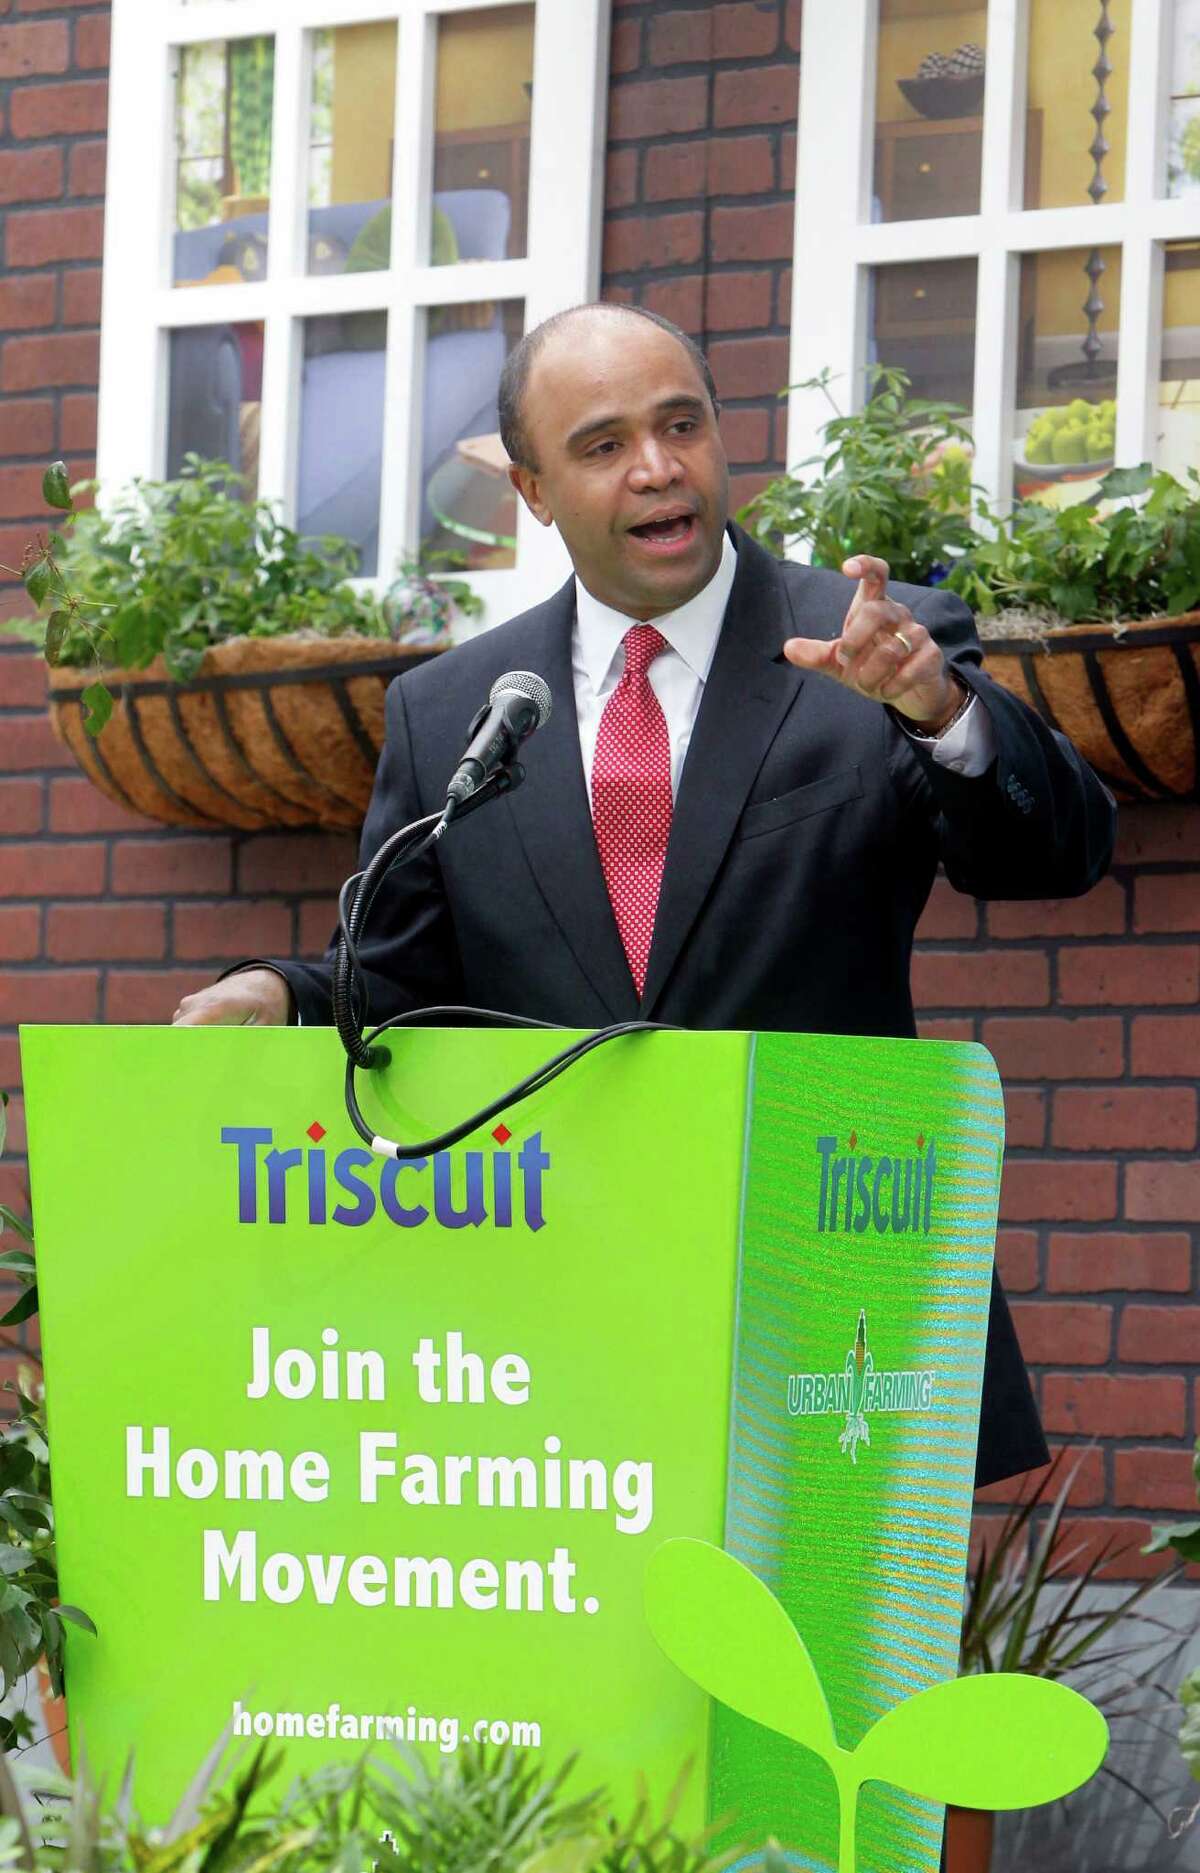 In this Tuesday, April 12, 2011 file photo Adolfo Carrion Jr., regional administrator of the U.S. Department of Housing and Urban Development, speaks at Triscuit Crackers 'Home Farming Day' celebration in New York's Madison Square Park. It sounds like a mismatch: a son of an illustrious Republican president supporting a Democrat-turned-independent, ex-Obama administration official in his quest to run for New York City mayor on the GOP line. But Michael Reagan is urging city Republican leaders to give Adolfo Carrion Jr. permission to run in the primary, saying it would strike a note of openness and diversity for a party that?’s grappling with how to attract Hispanic voters. (Jason DeCrow/AP Images for Kraft Foods)